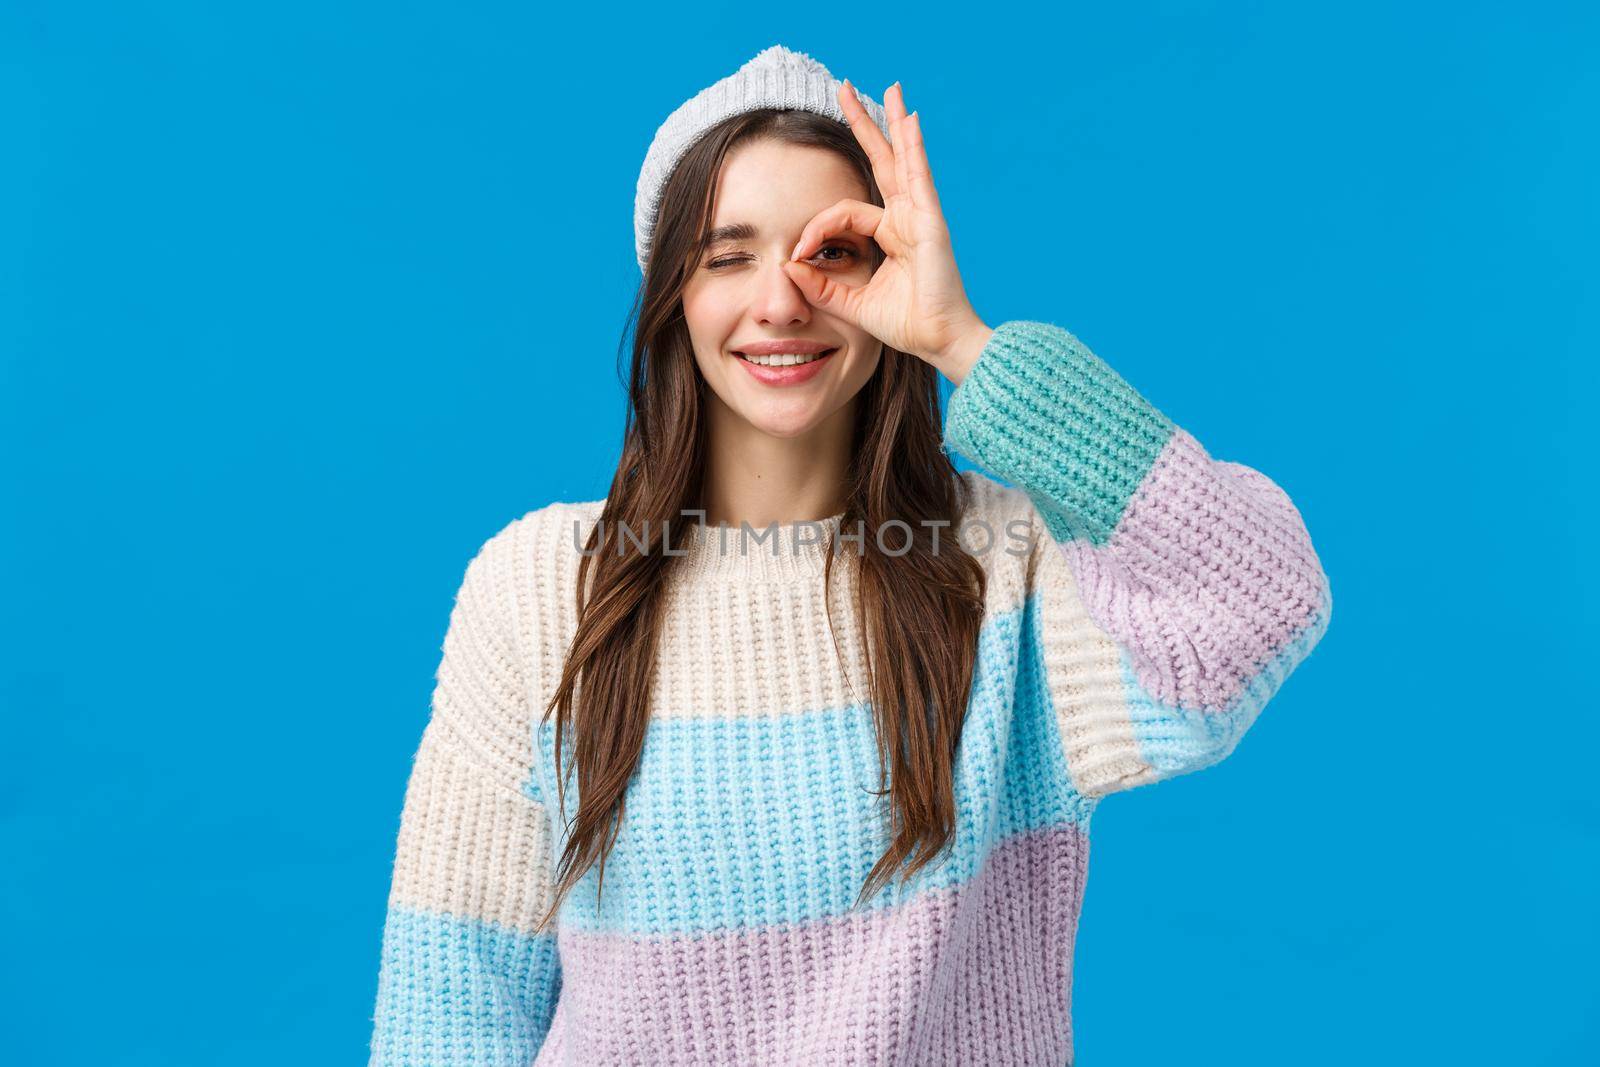 Waist-up portrait cheerful beautiful brunette woman in winter sweater, hat, showing okay, good gesture, OK sign over eye, smiling and wink in approval, assertive everything alright, blue background.